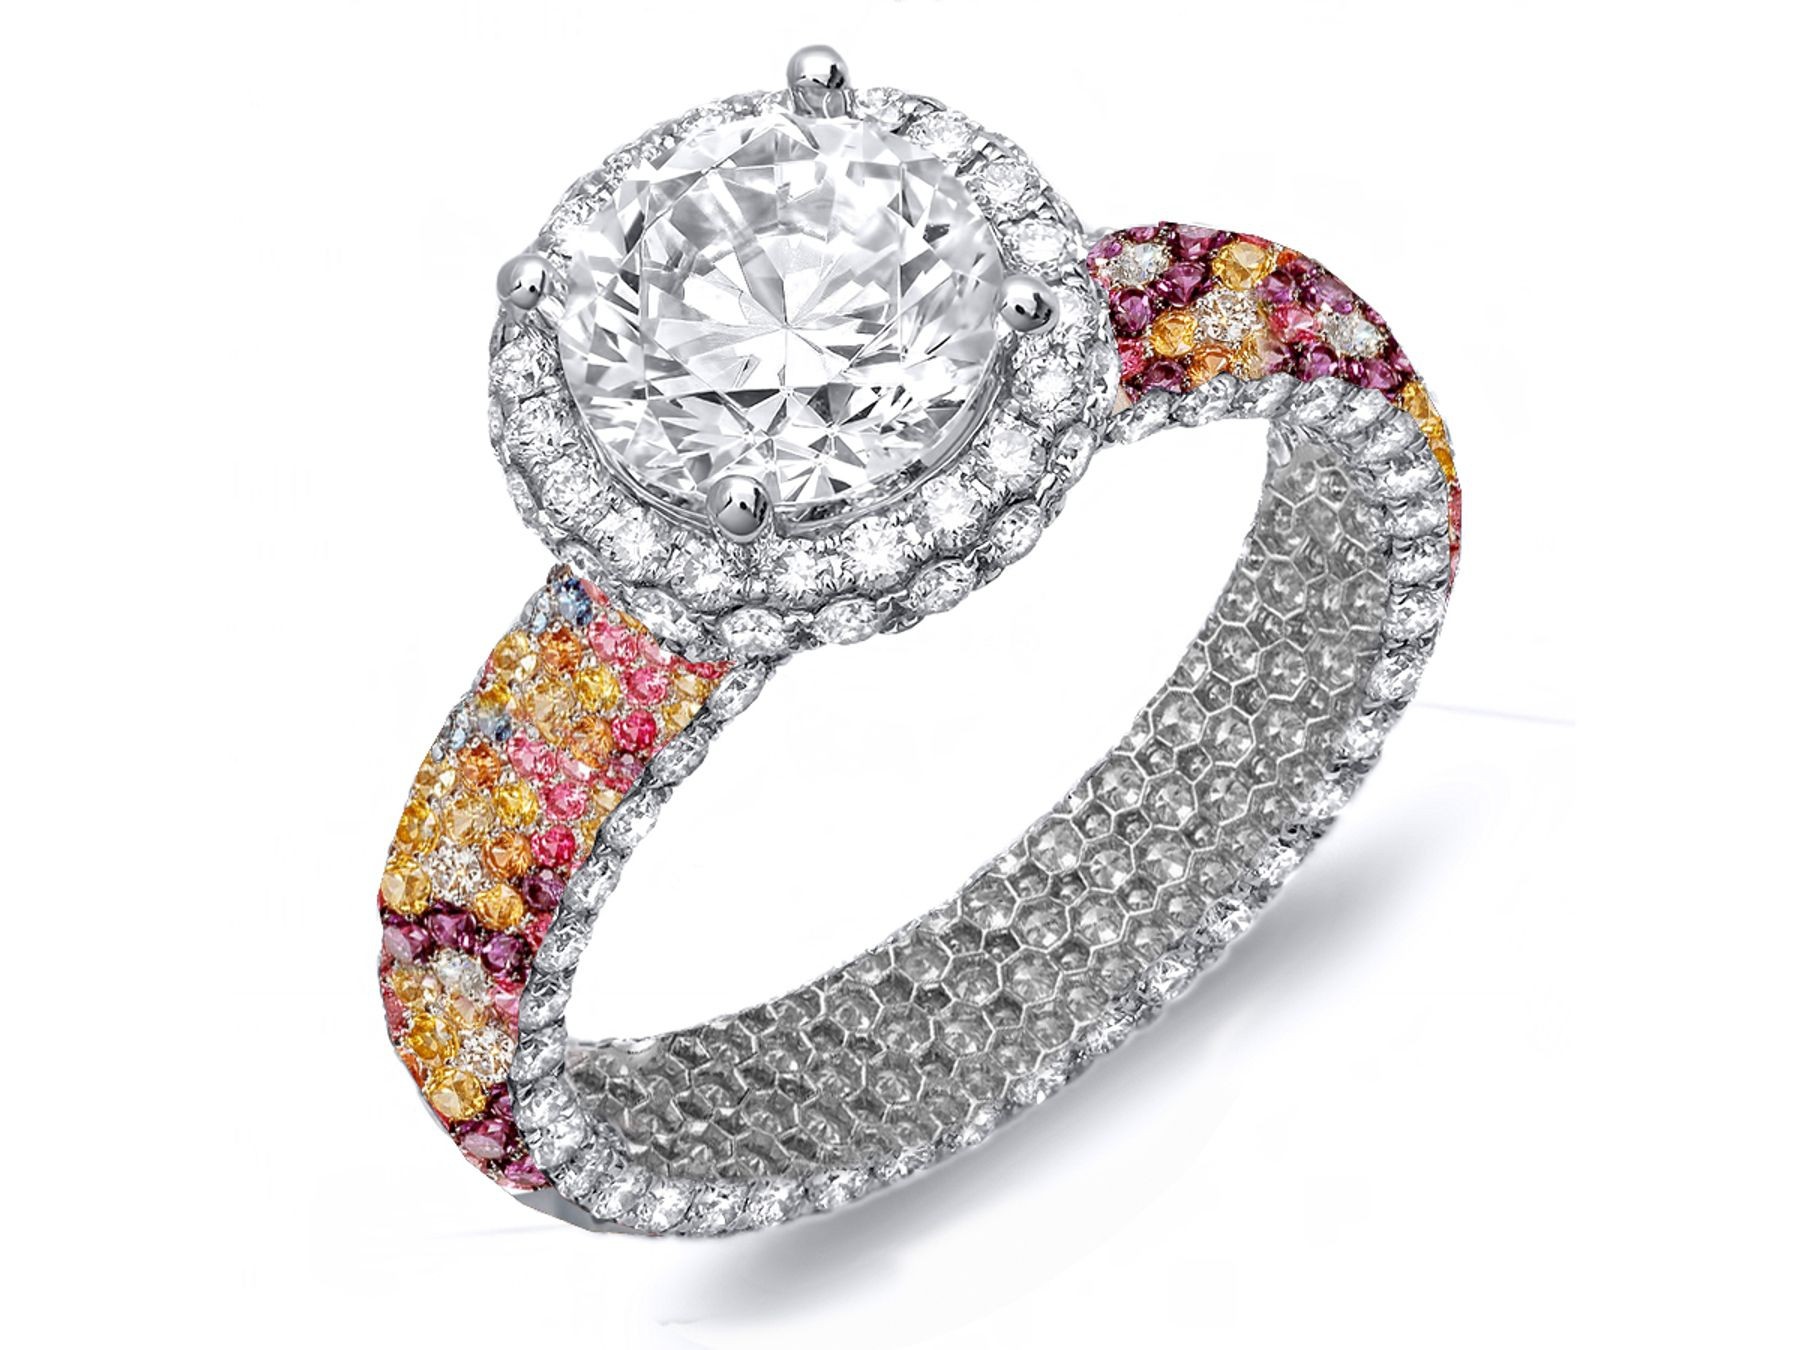 Made To Order Rings Featuring Delicate French Halo Pave Diamonds & Multi-Colored Sapphires